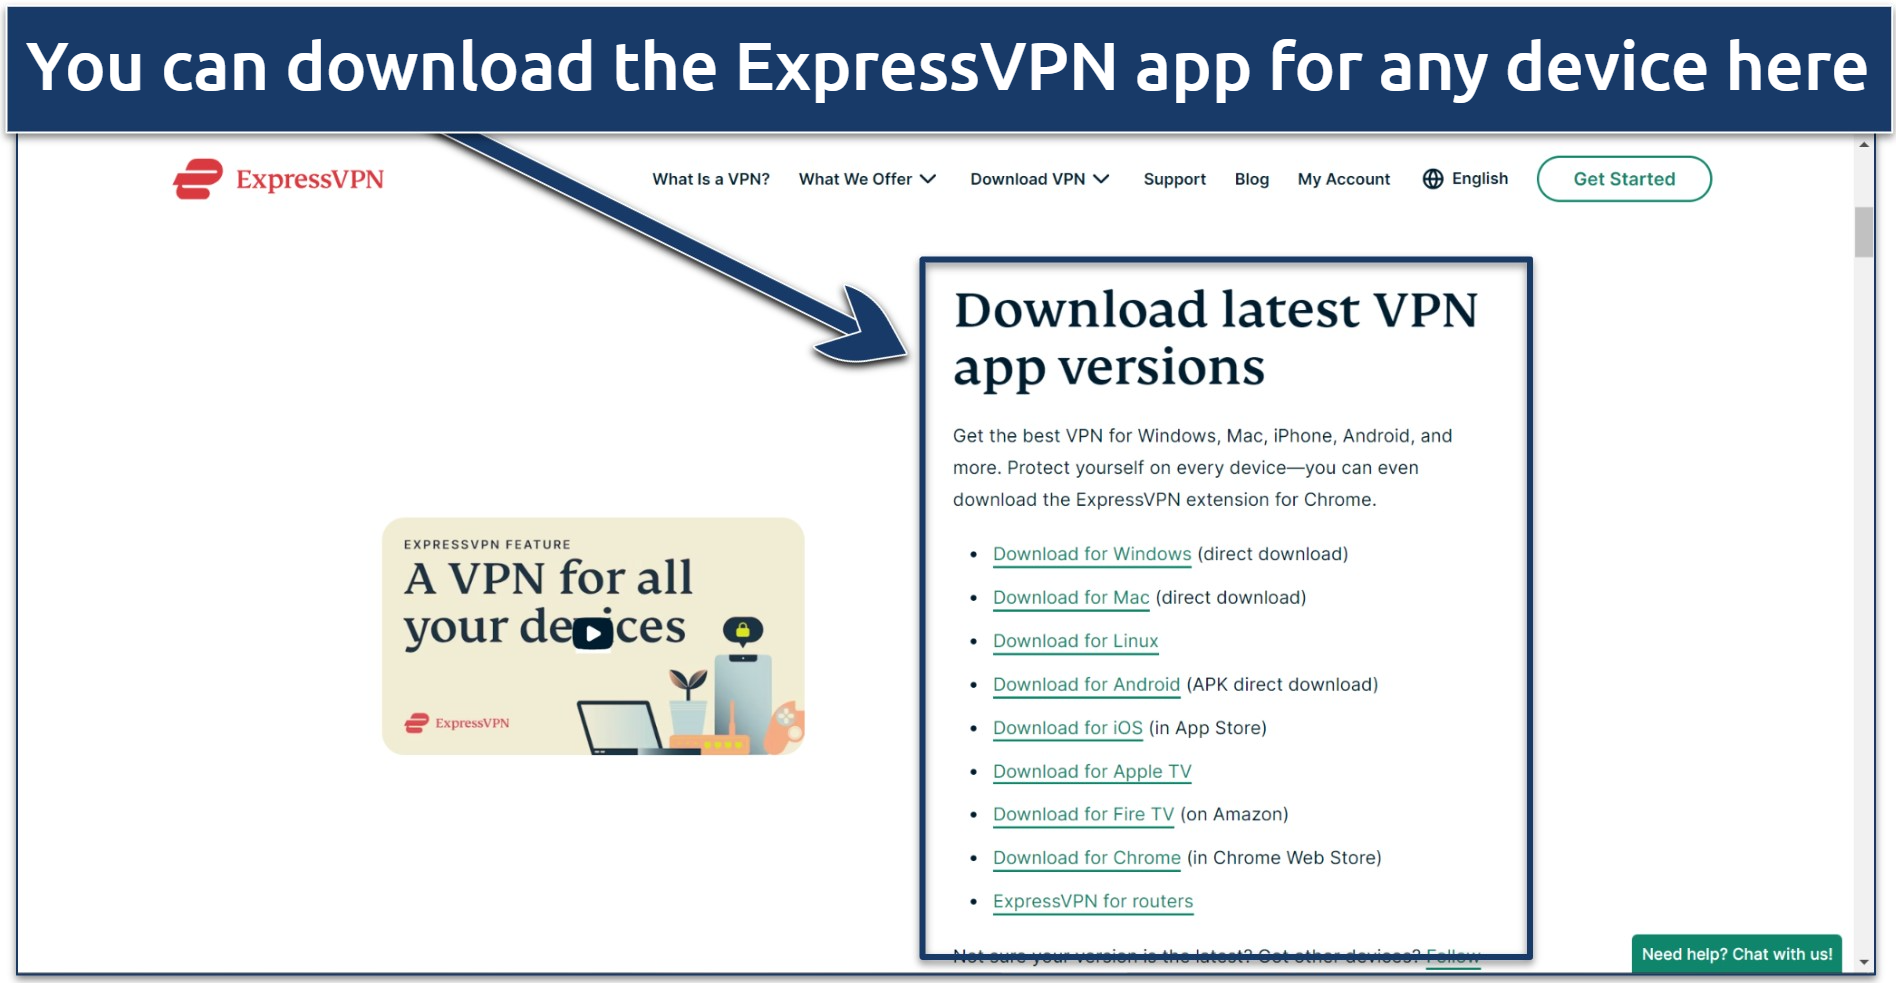 Screenshot of the ExpressVPN download page with links for each platform